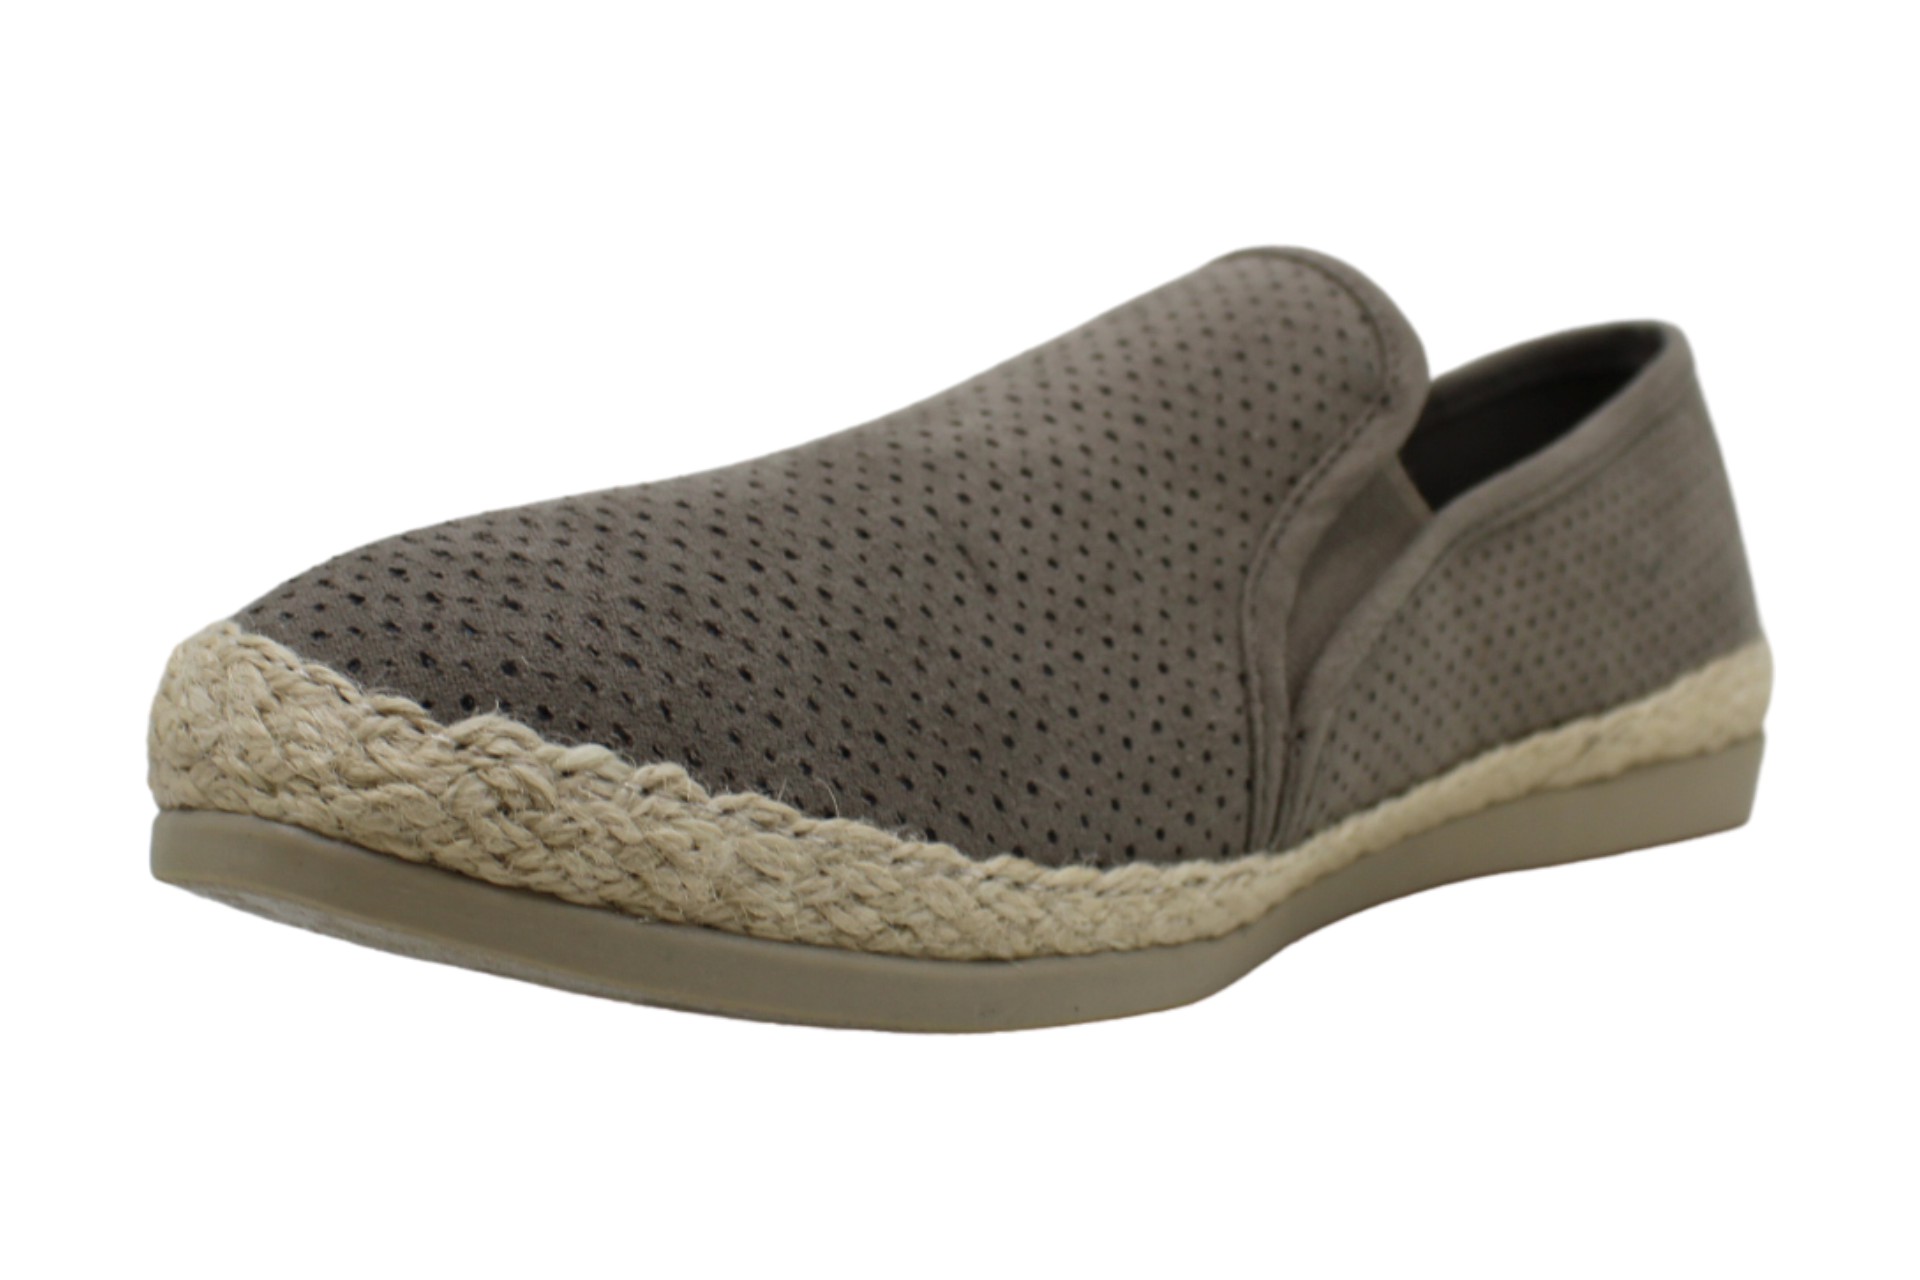 ESPRIT Womens Spring Suede Closed Toe Slip On Slippers, Elephant, Size ...